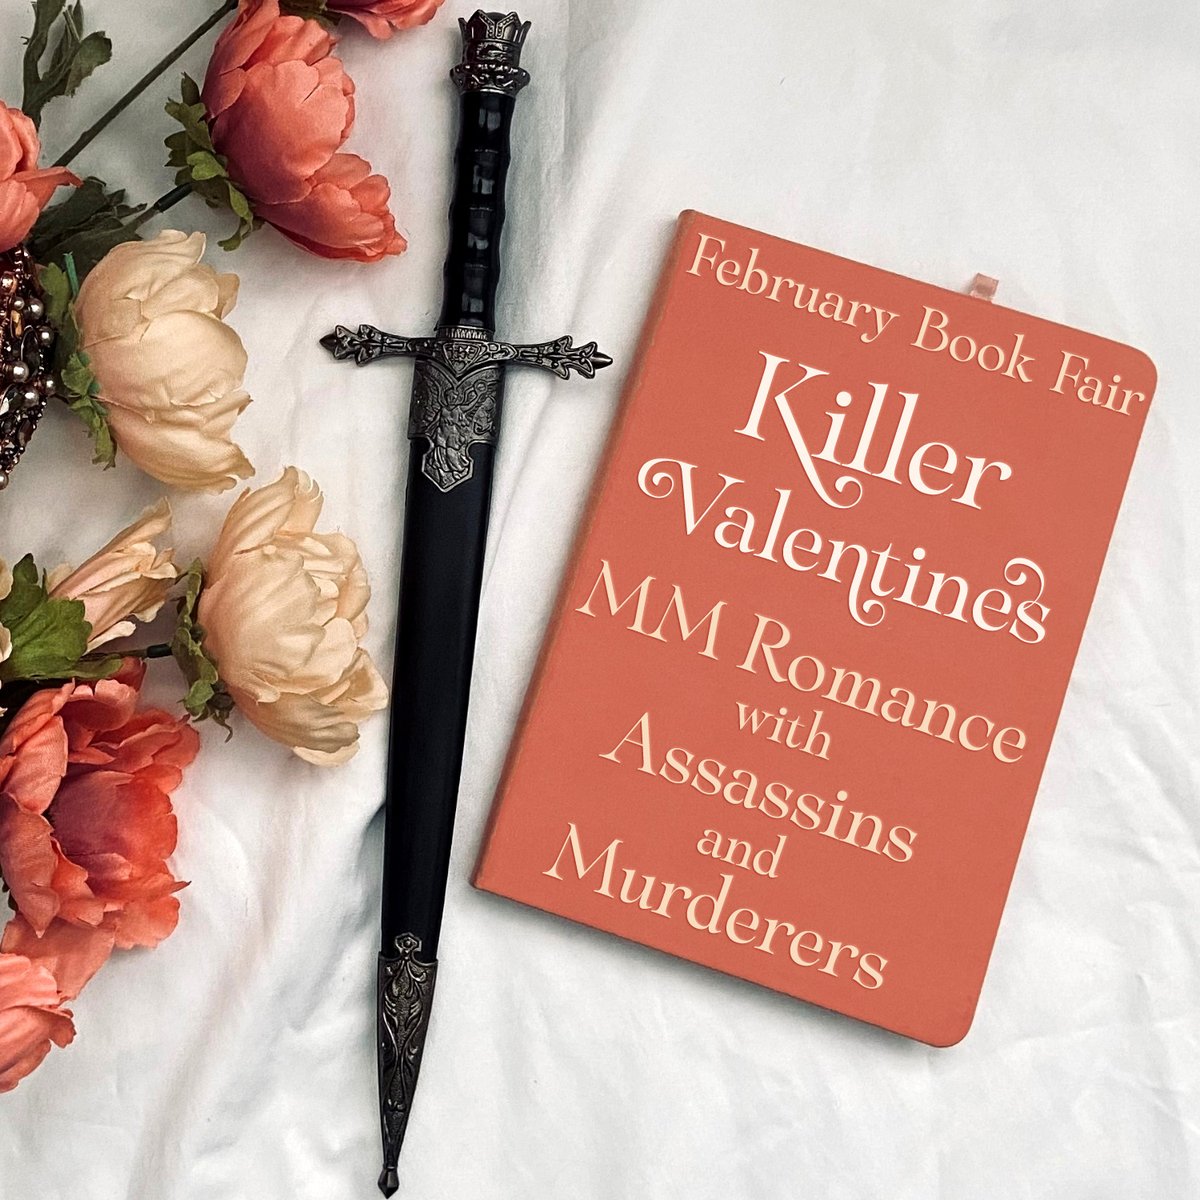 Looking for a fictional bad boy to while away the hours with? Check out the Killer Valentines MM romance with assassins and murderers promo. You can find it here books.bookfunnel.com/mmkillervalent… #mmromance #lgbt #gayromance